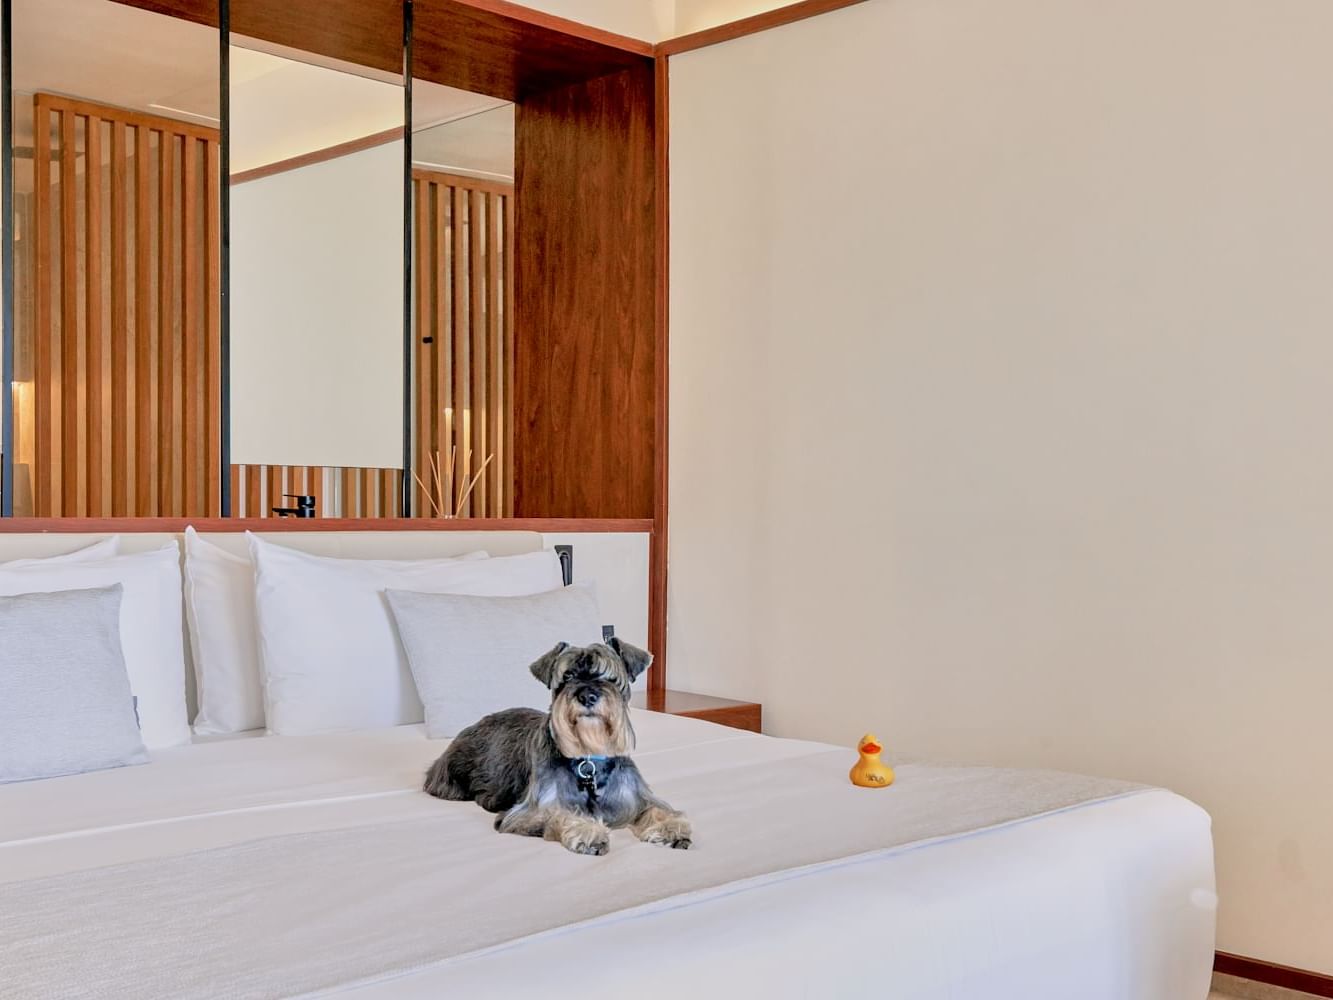 Dog on a comfy bed in Premium Deluxe Garden View room at Live Aqua Punta Cana